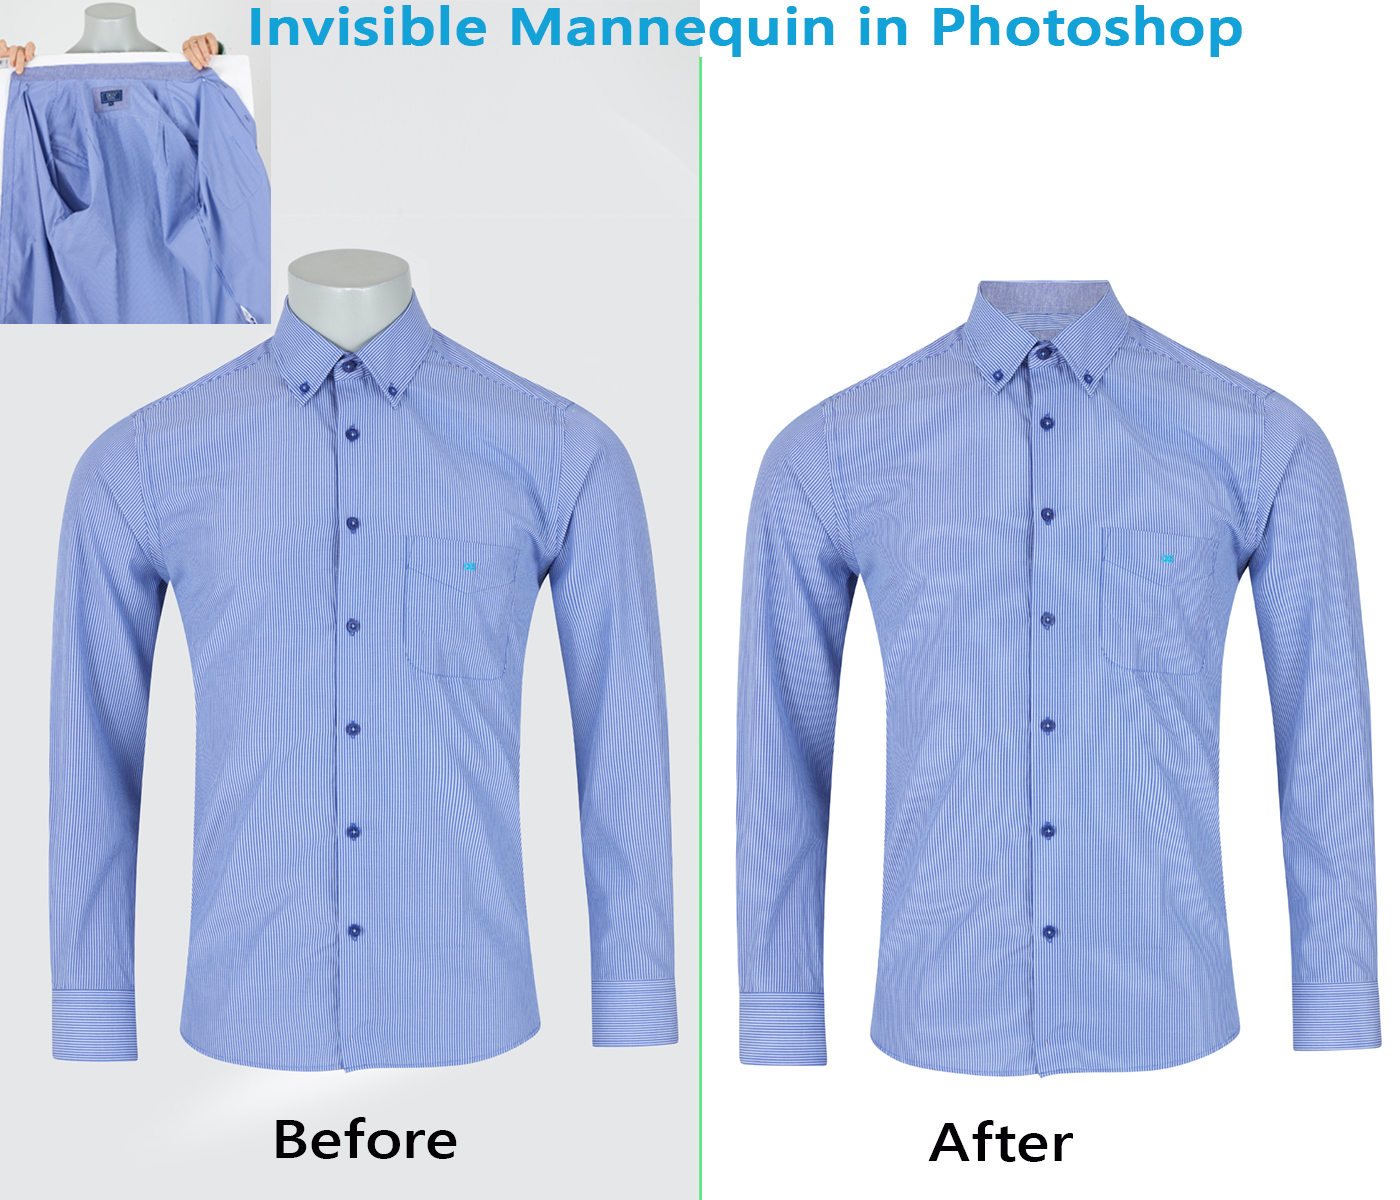 Invisible Mannequin in Photoshop